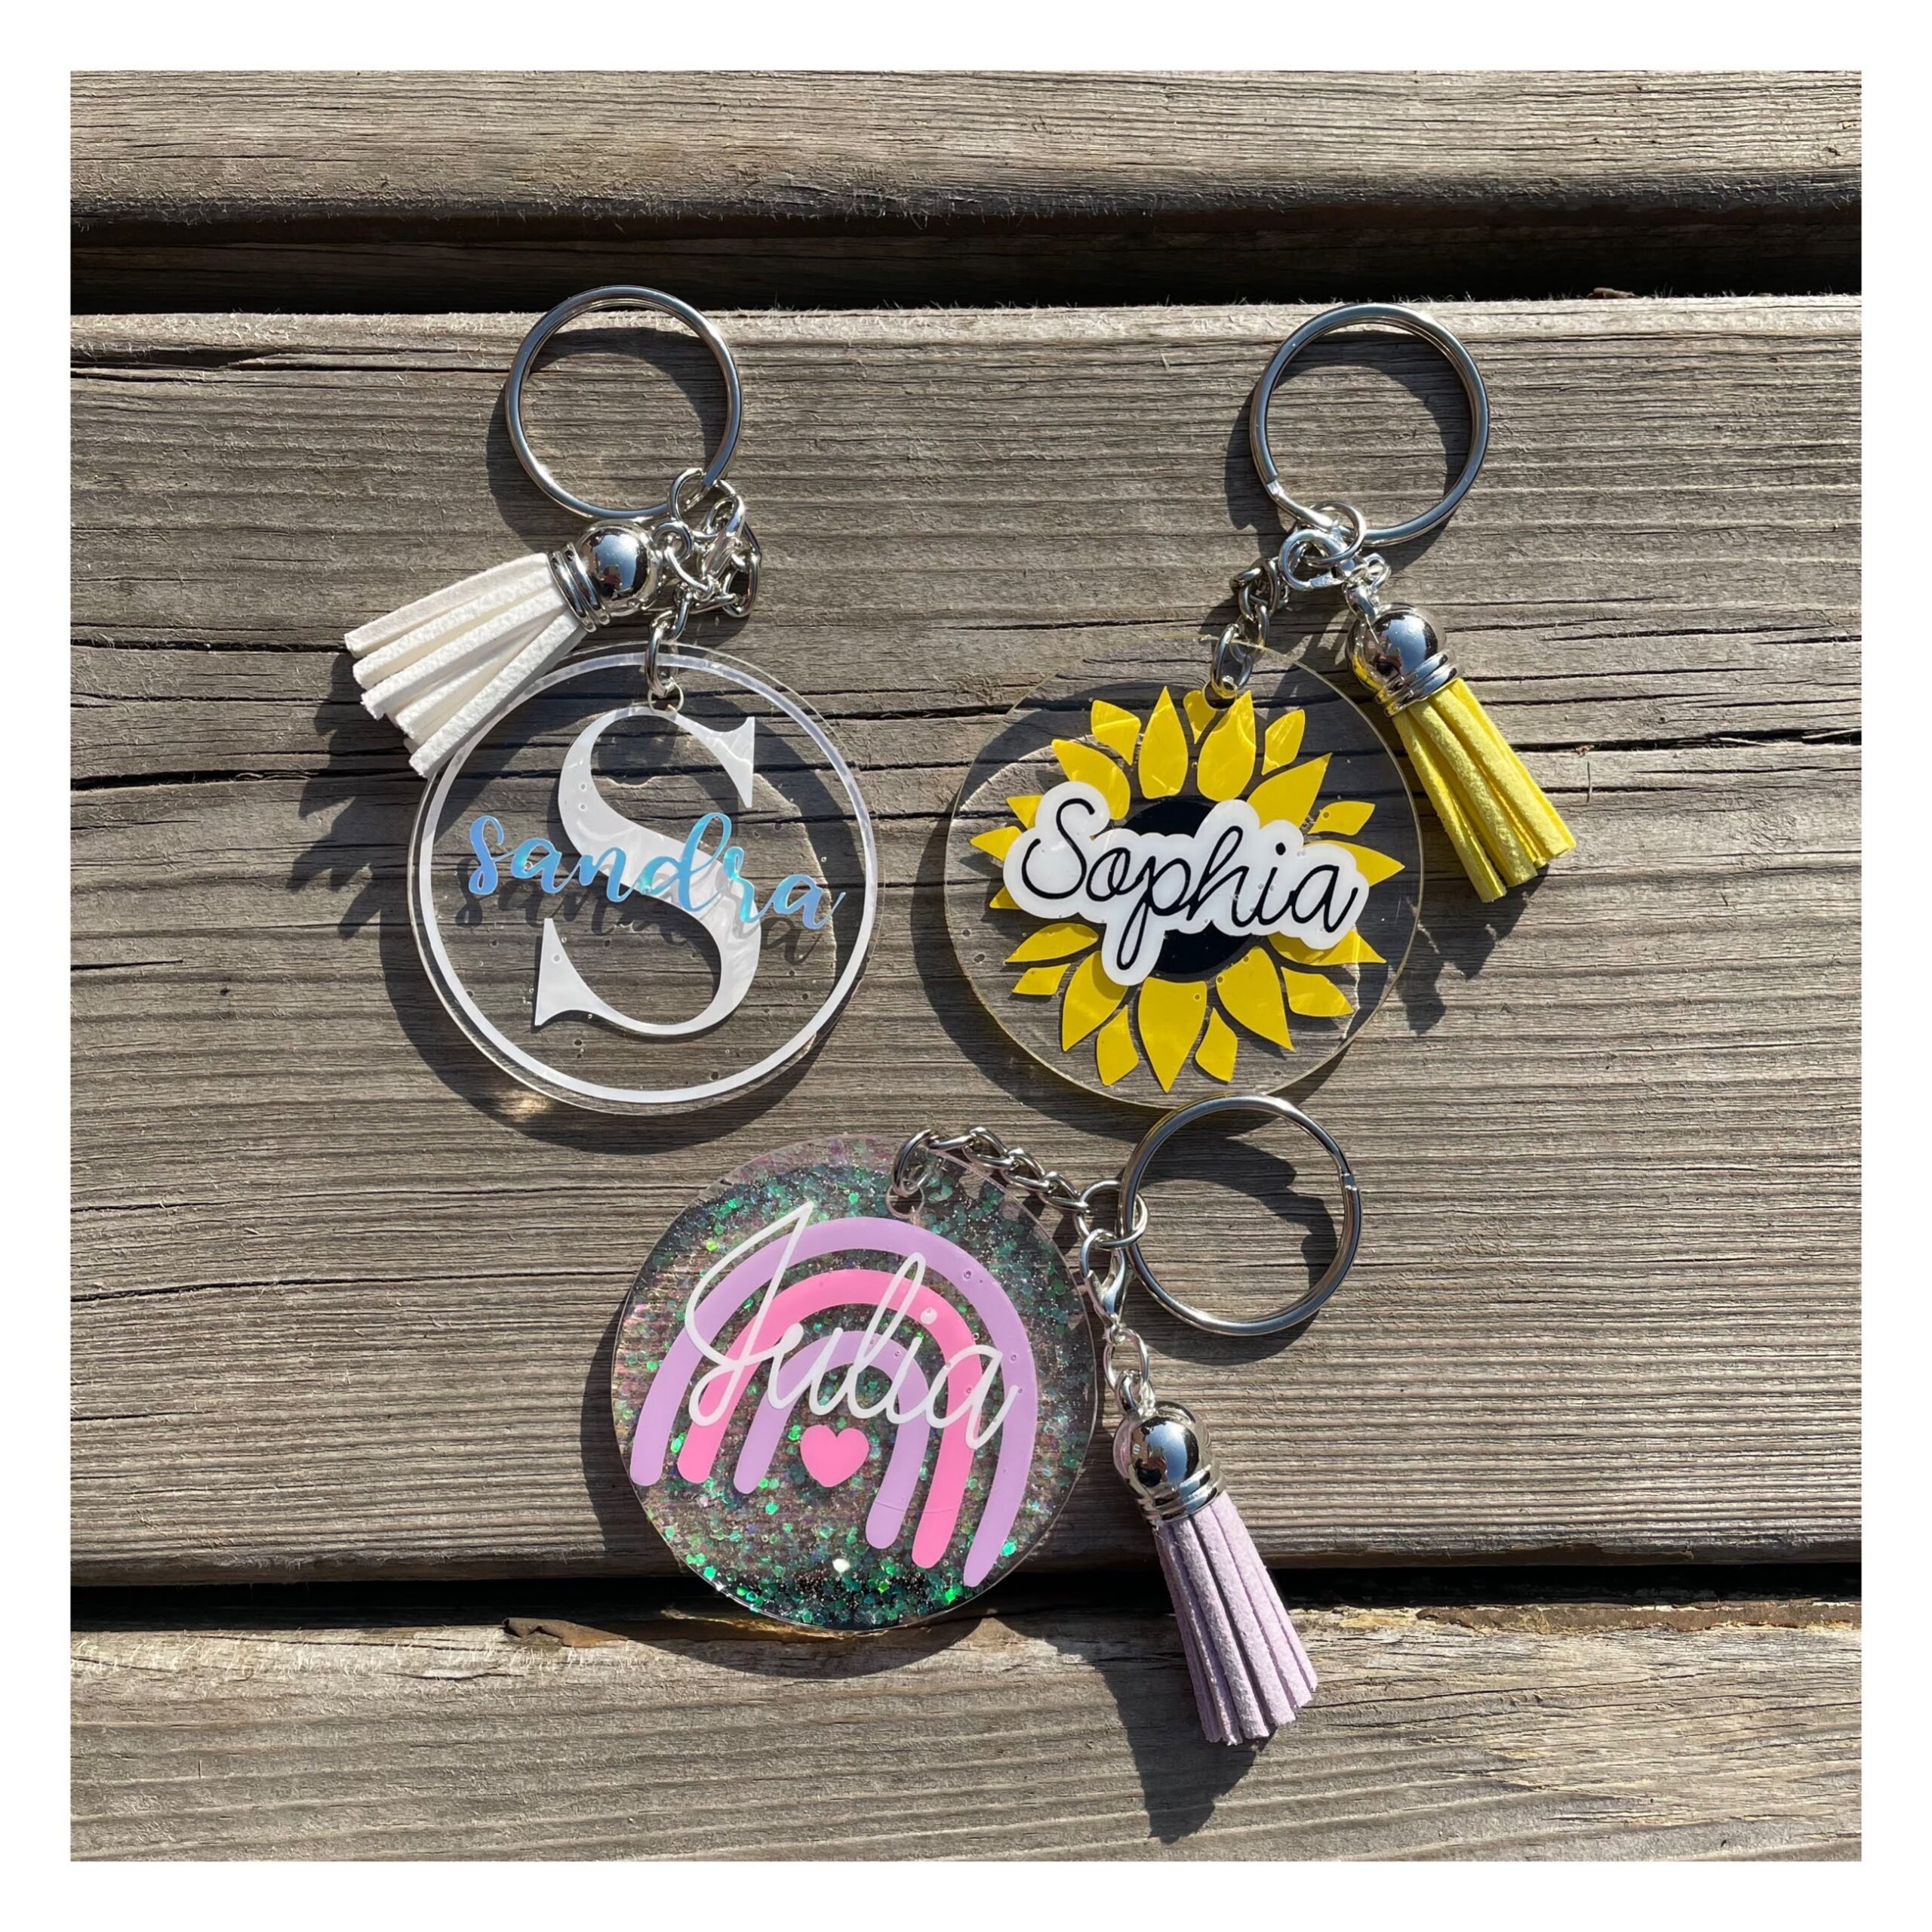 Shop Unique Keychains Online - Find Designs in Different Shapes and Sizes